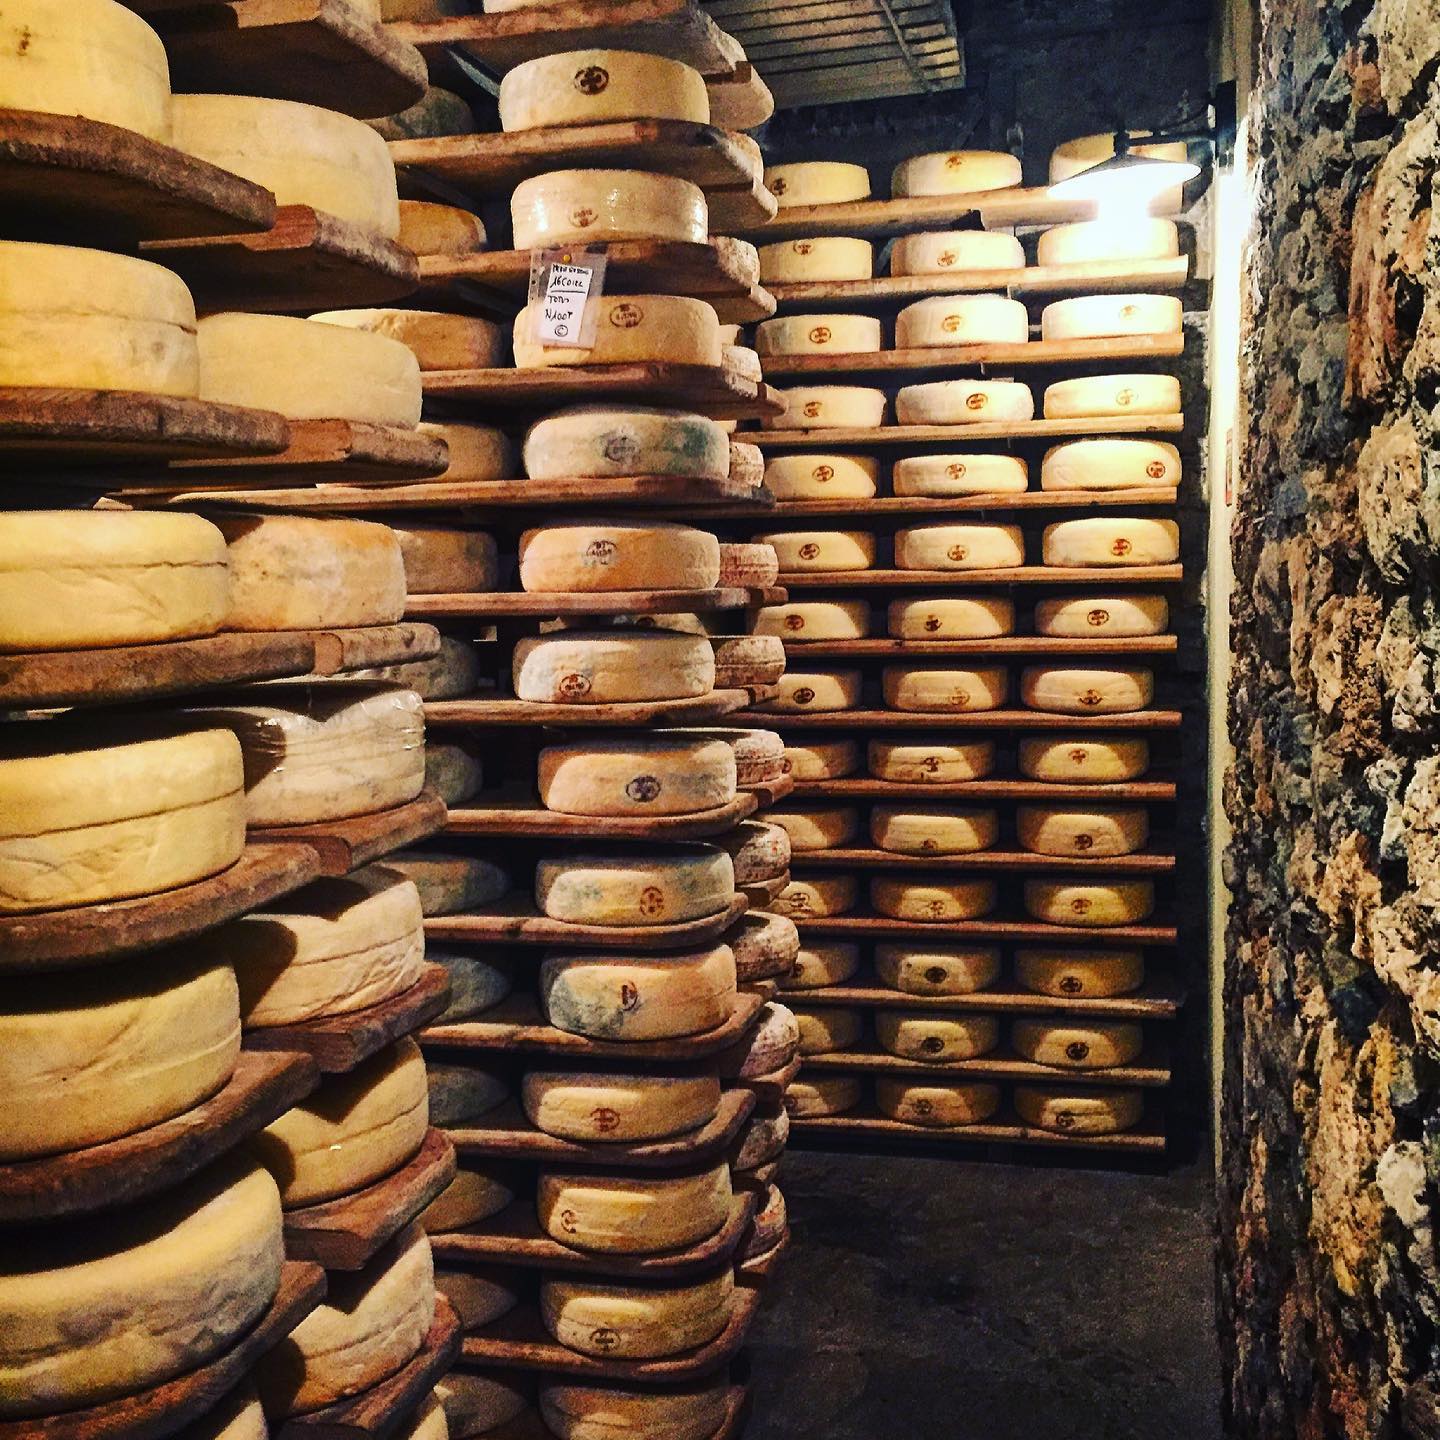 Discovering Castelmagno and the mountain cheeses of the Cuneo area